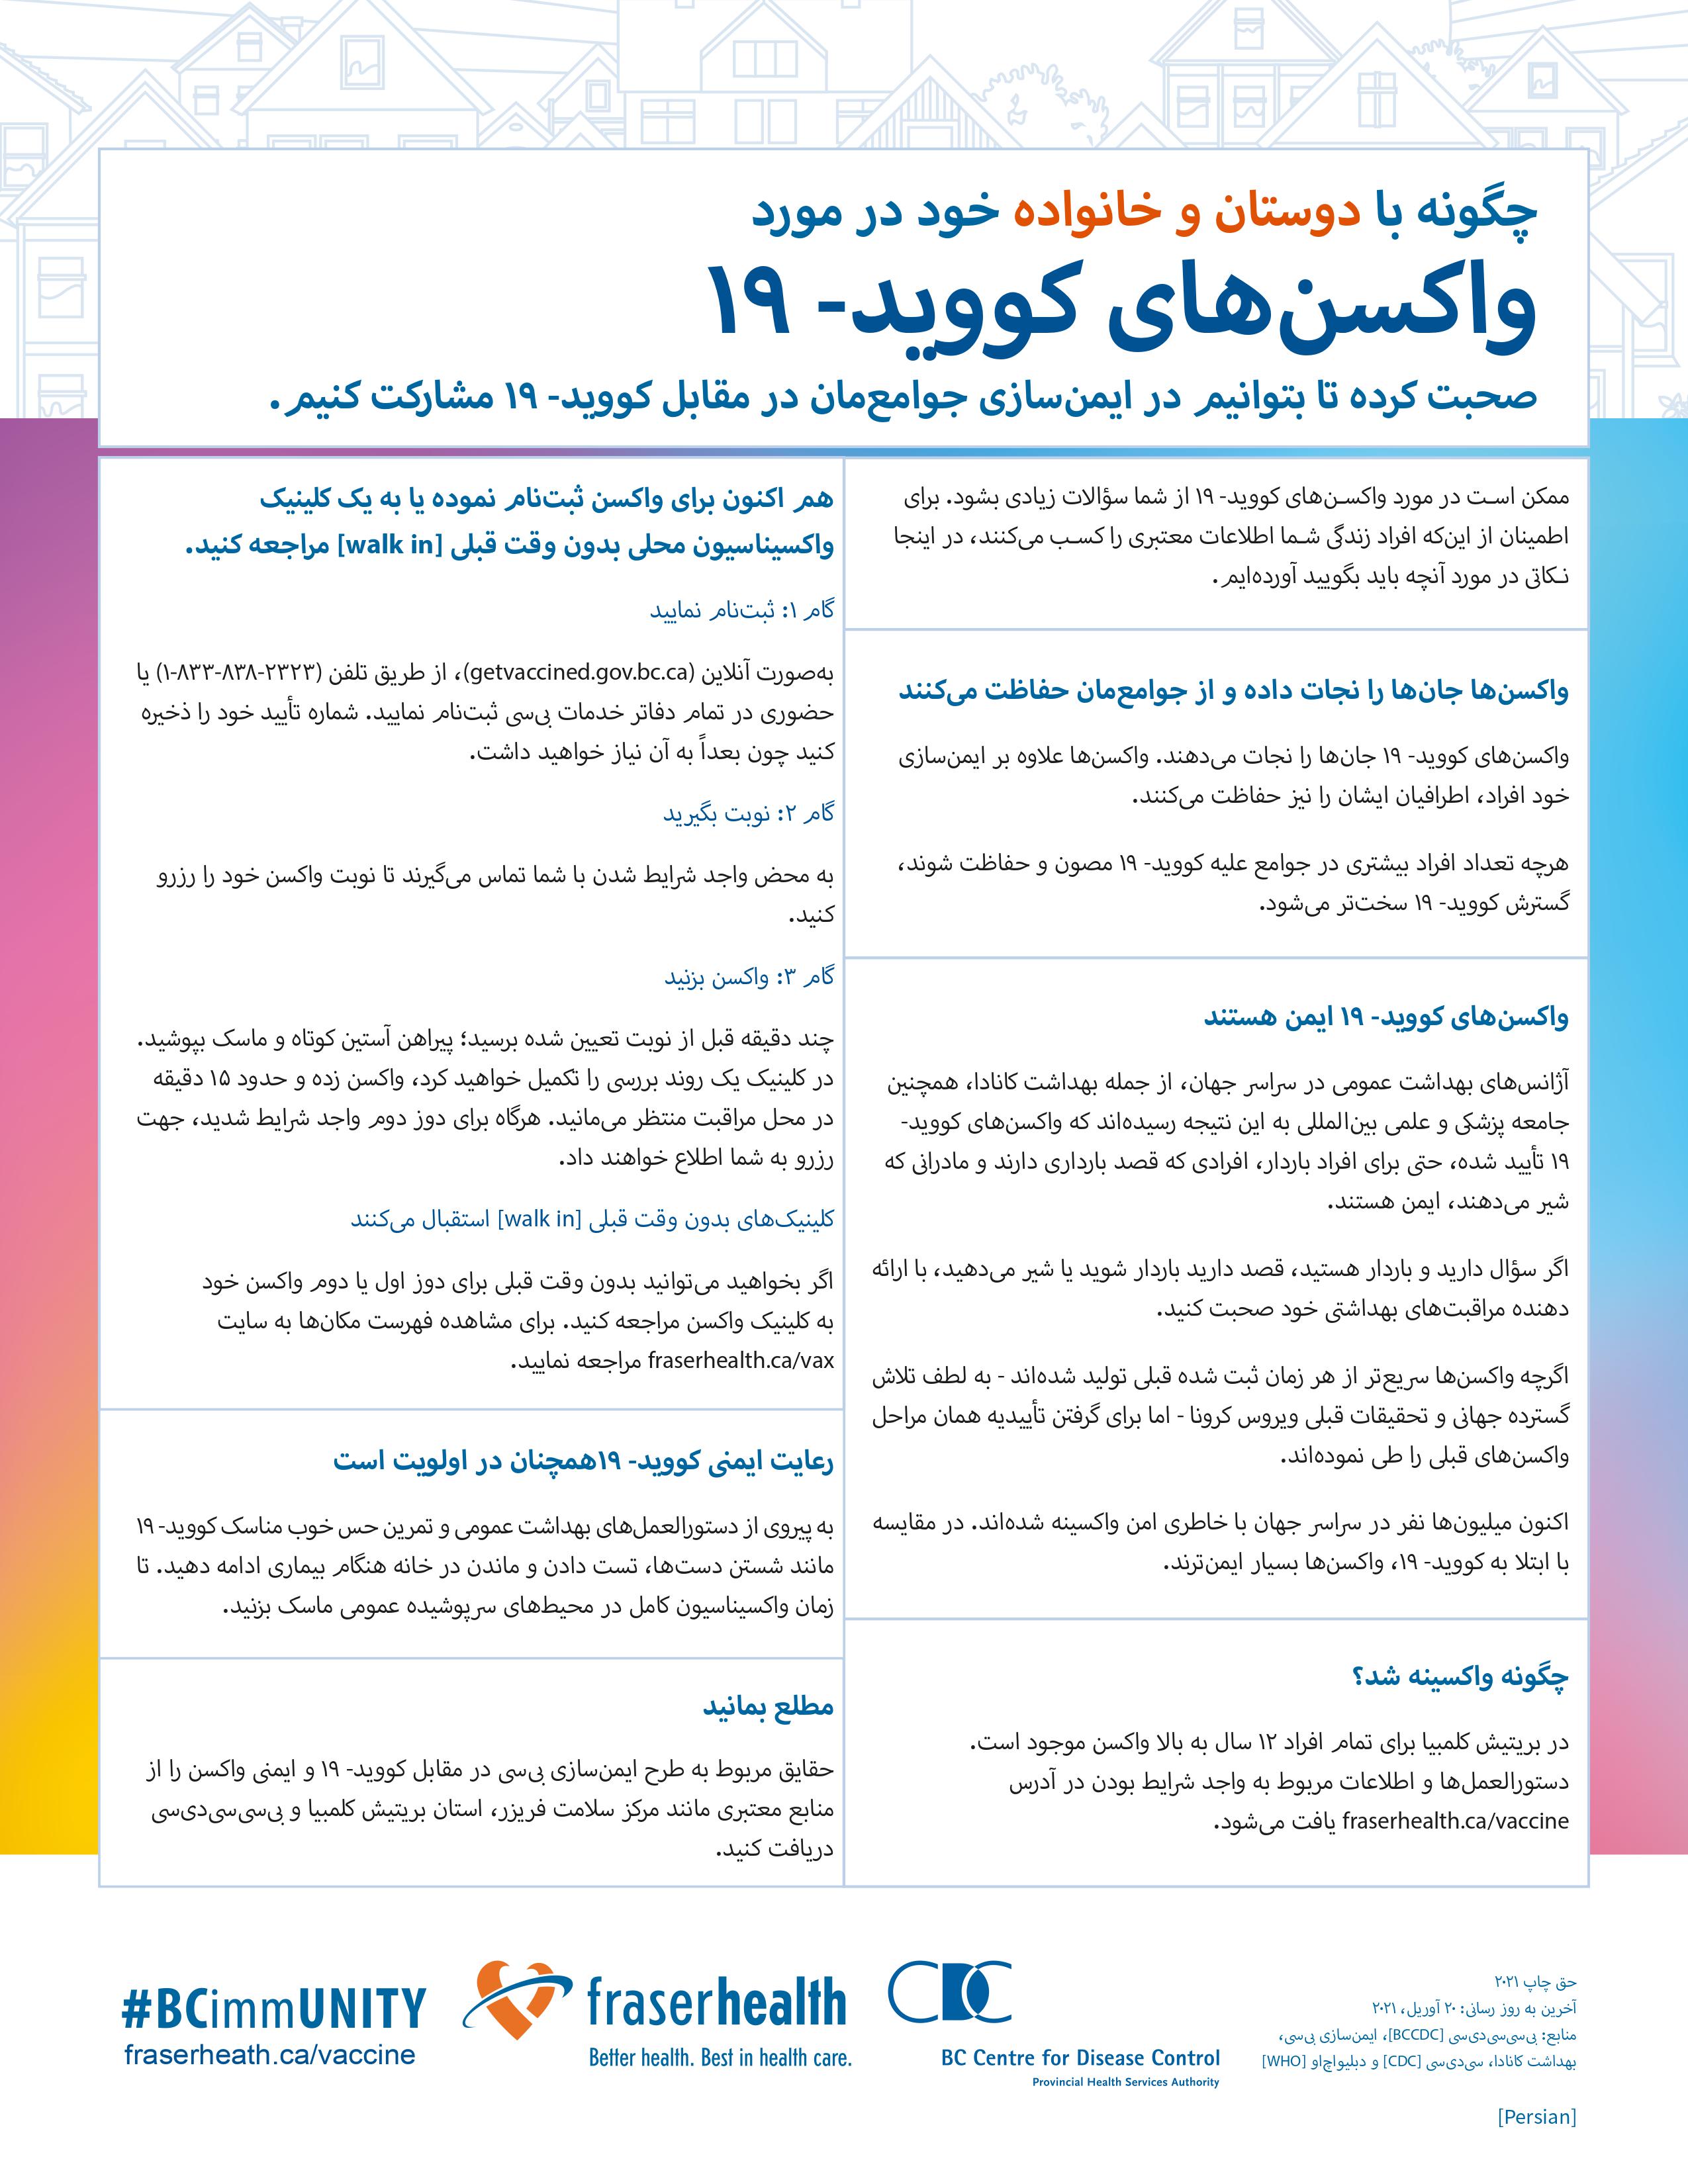 Infographic on how to talk to your friends about COVID-19 vaccines in Farsi